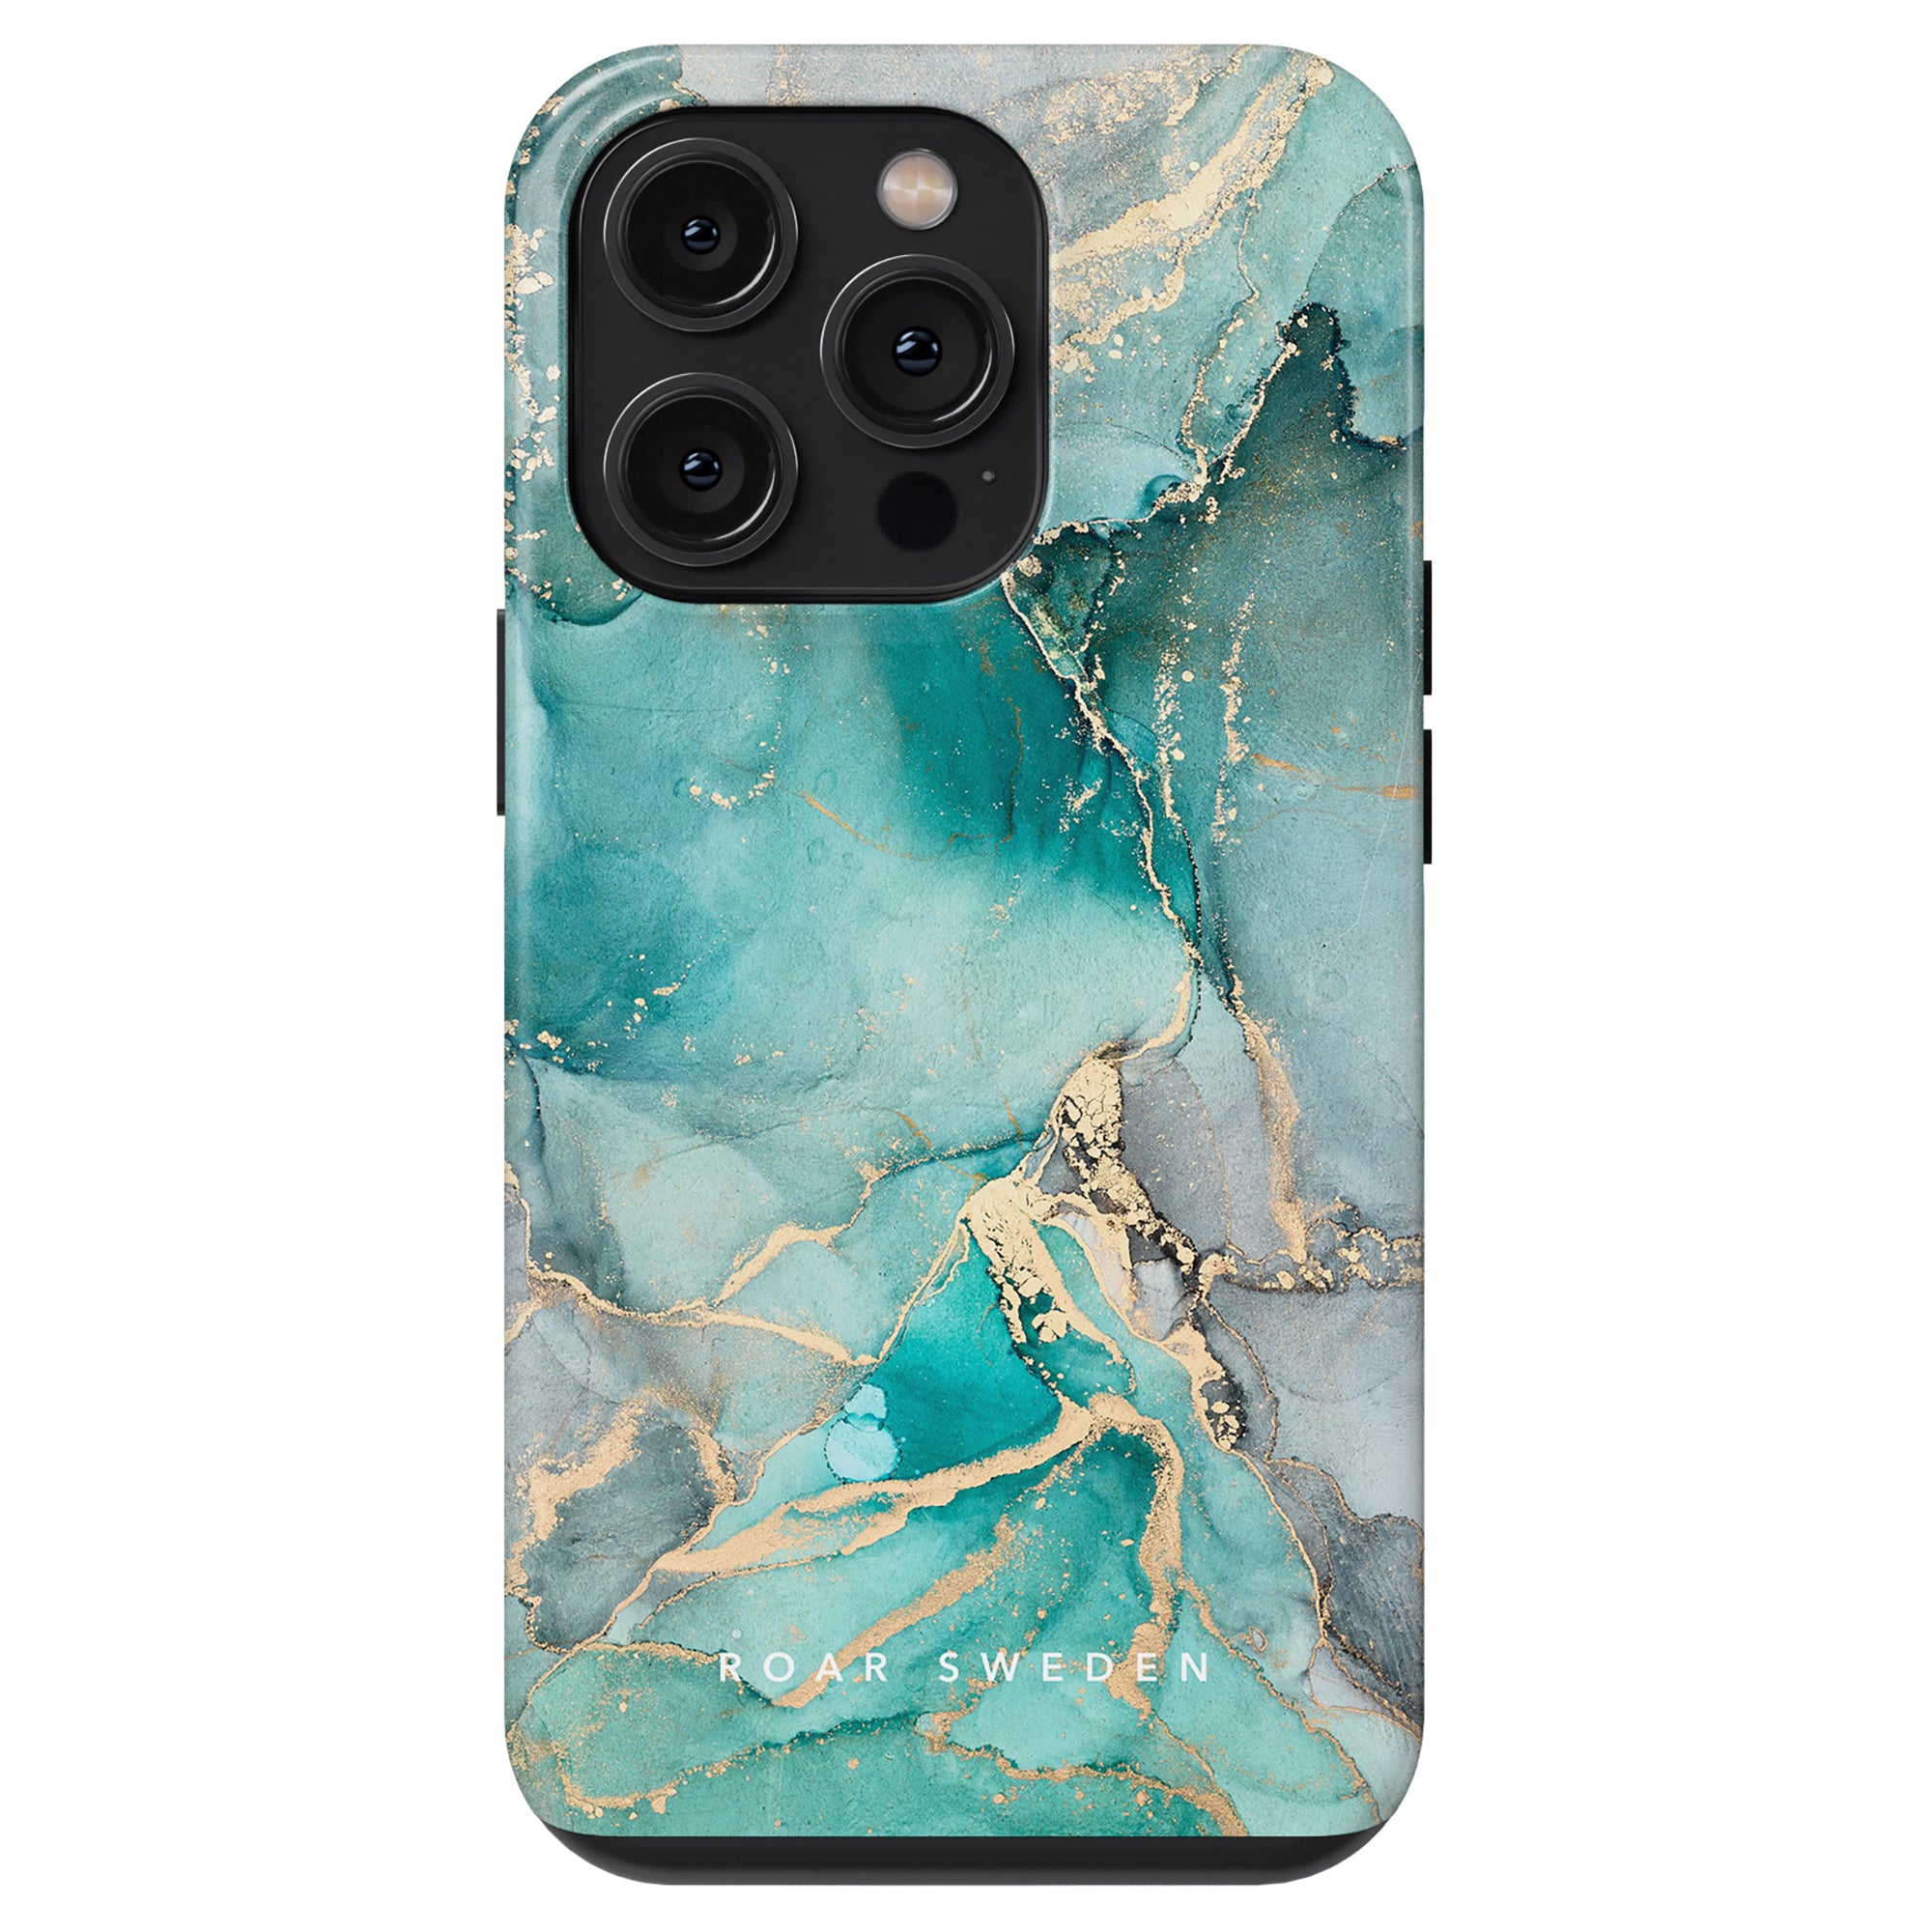 A smartphone with a Ferozah - Tough Case featuring a turquoise and gold marble design labeled "roar sweden." The phone has a triple-lens camera.